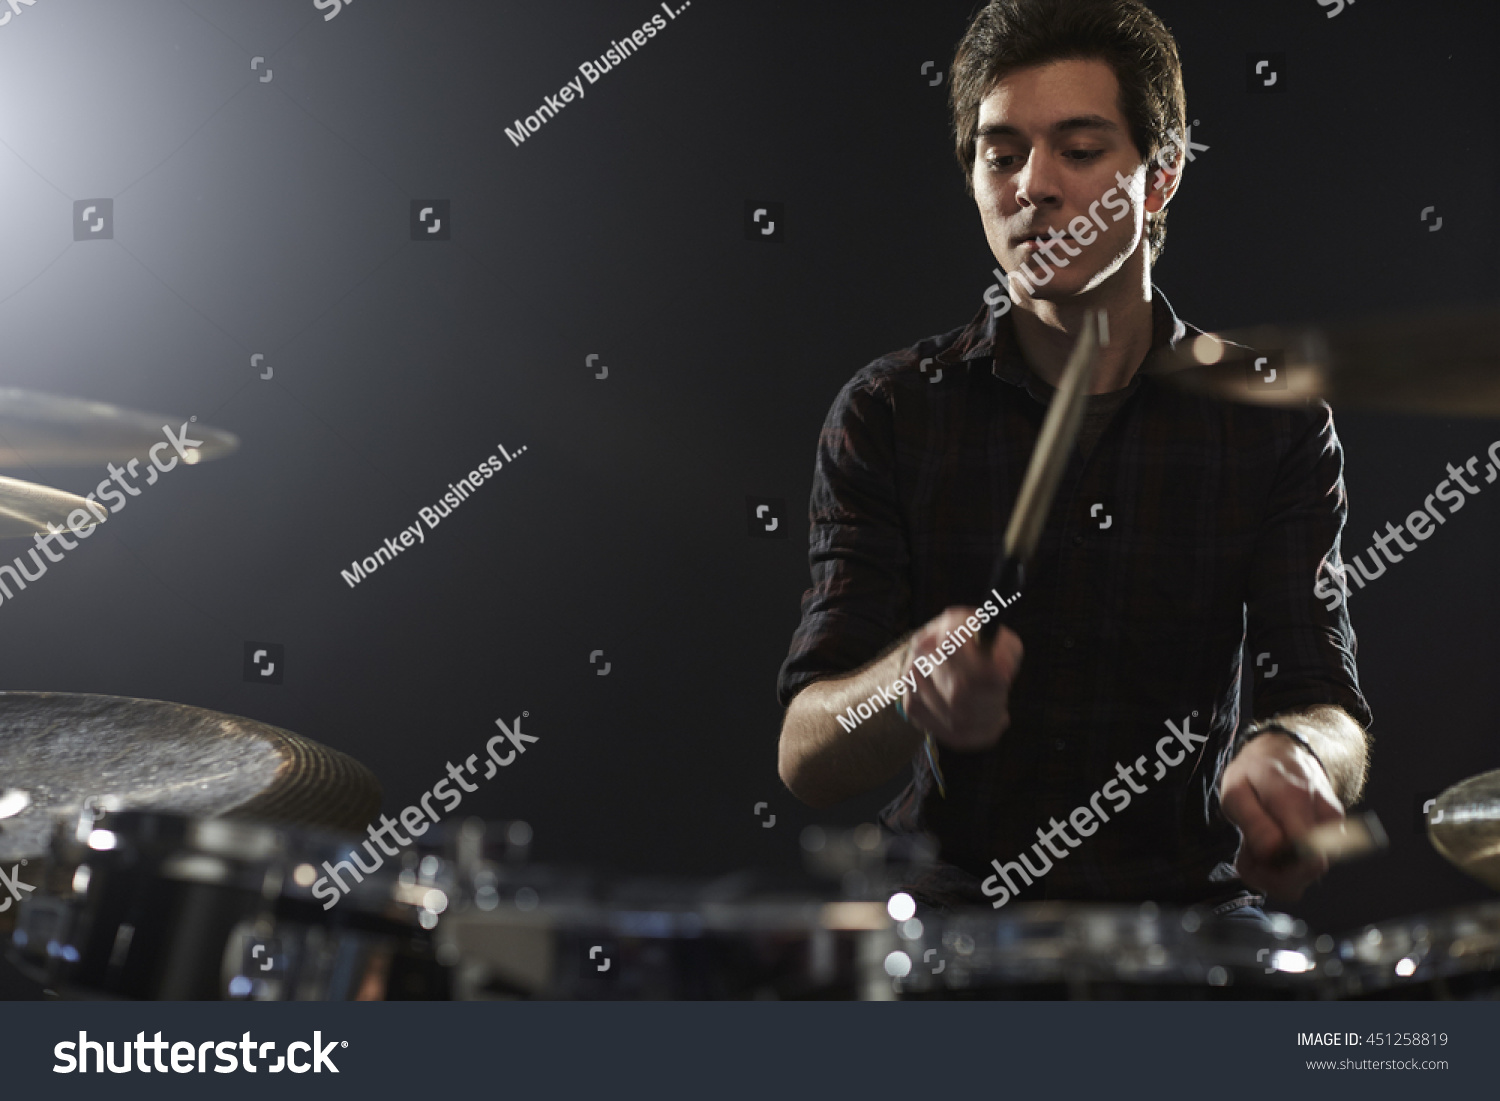 Young Drummer Playing Drum Kit In Studio Stock Photo 451258819 ...